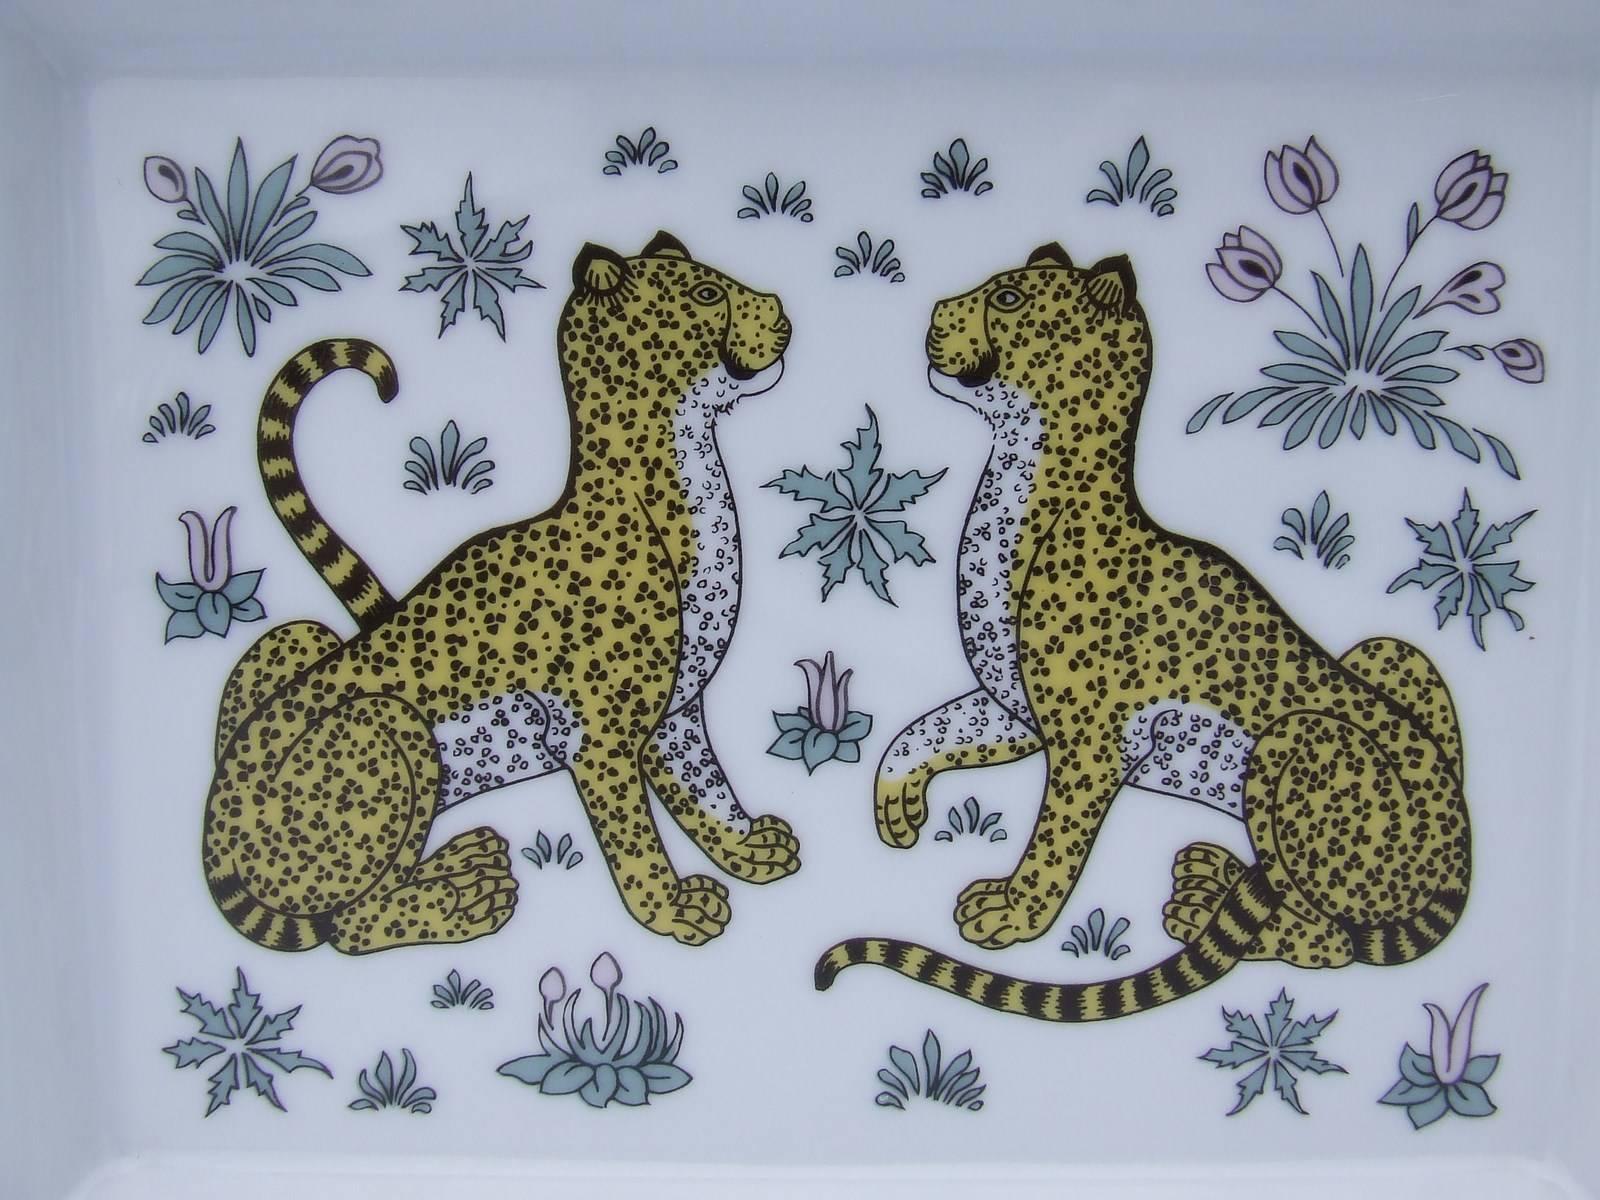 BEAUTIFUL AUTHENTIC HERMES ASHTRAY

Patter: Cheetah (Guépards)

Made in France in Limoges, French town famous for its fine porcelain and inimitable know-how

Made of Porcelain

Colors: Back Bacground, Yellow and Black Cheetah, Pink and